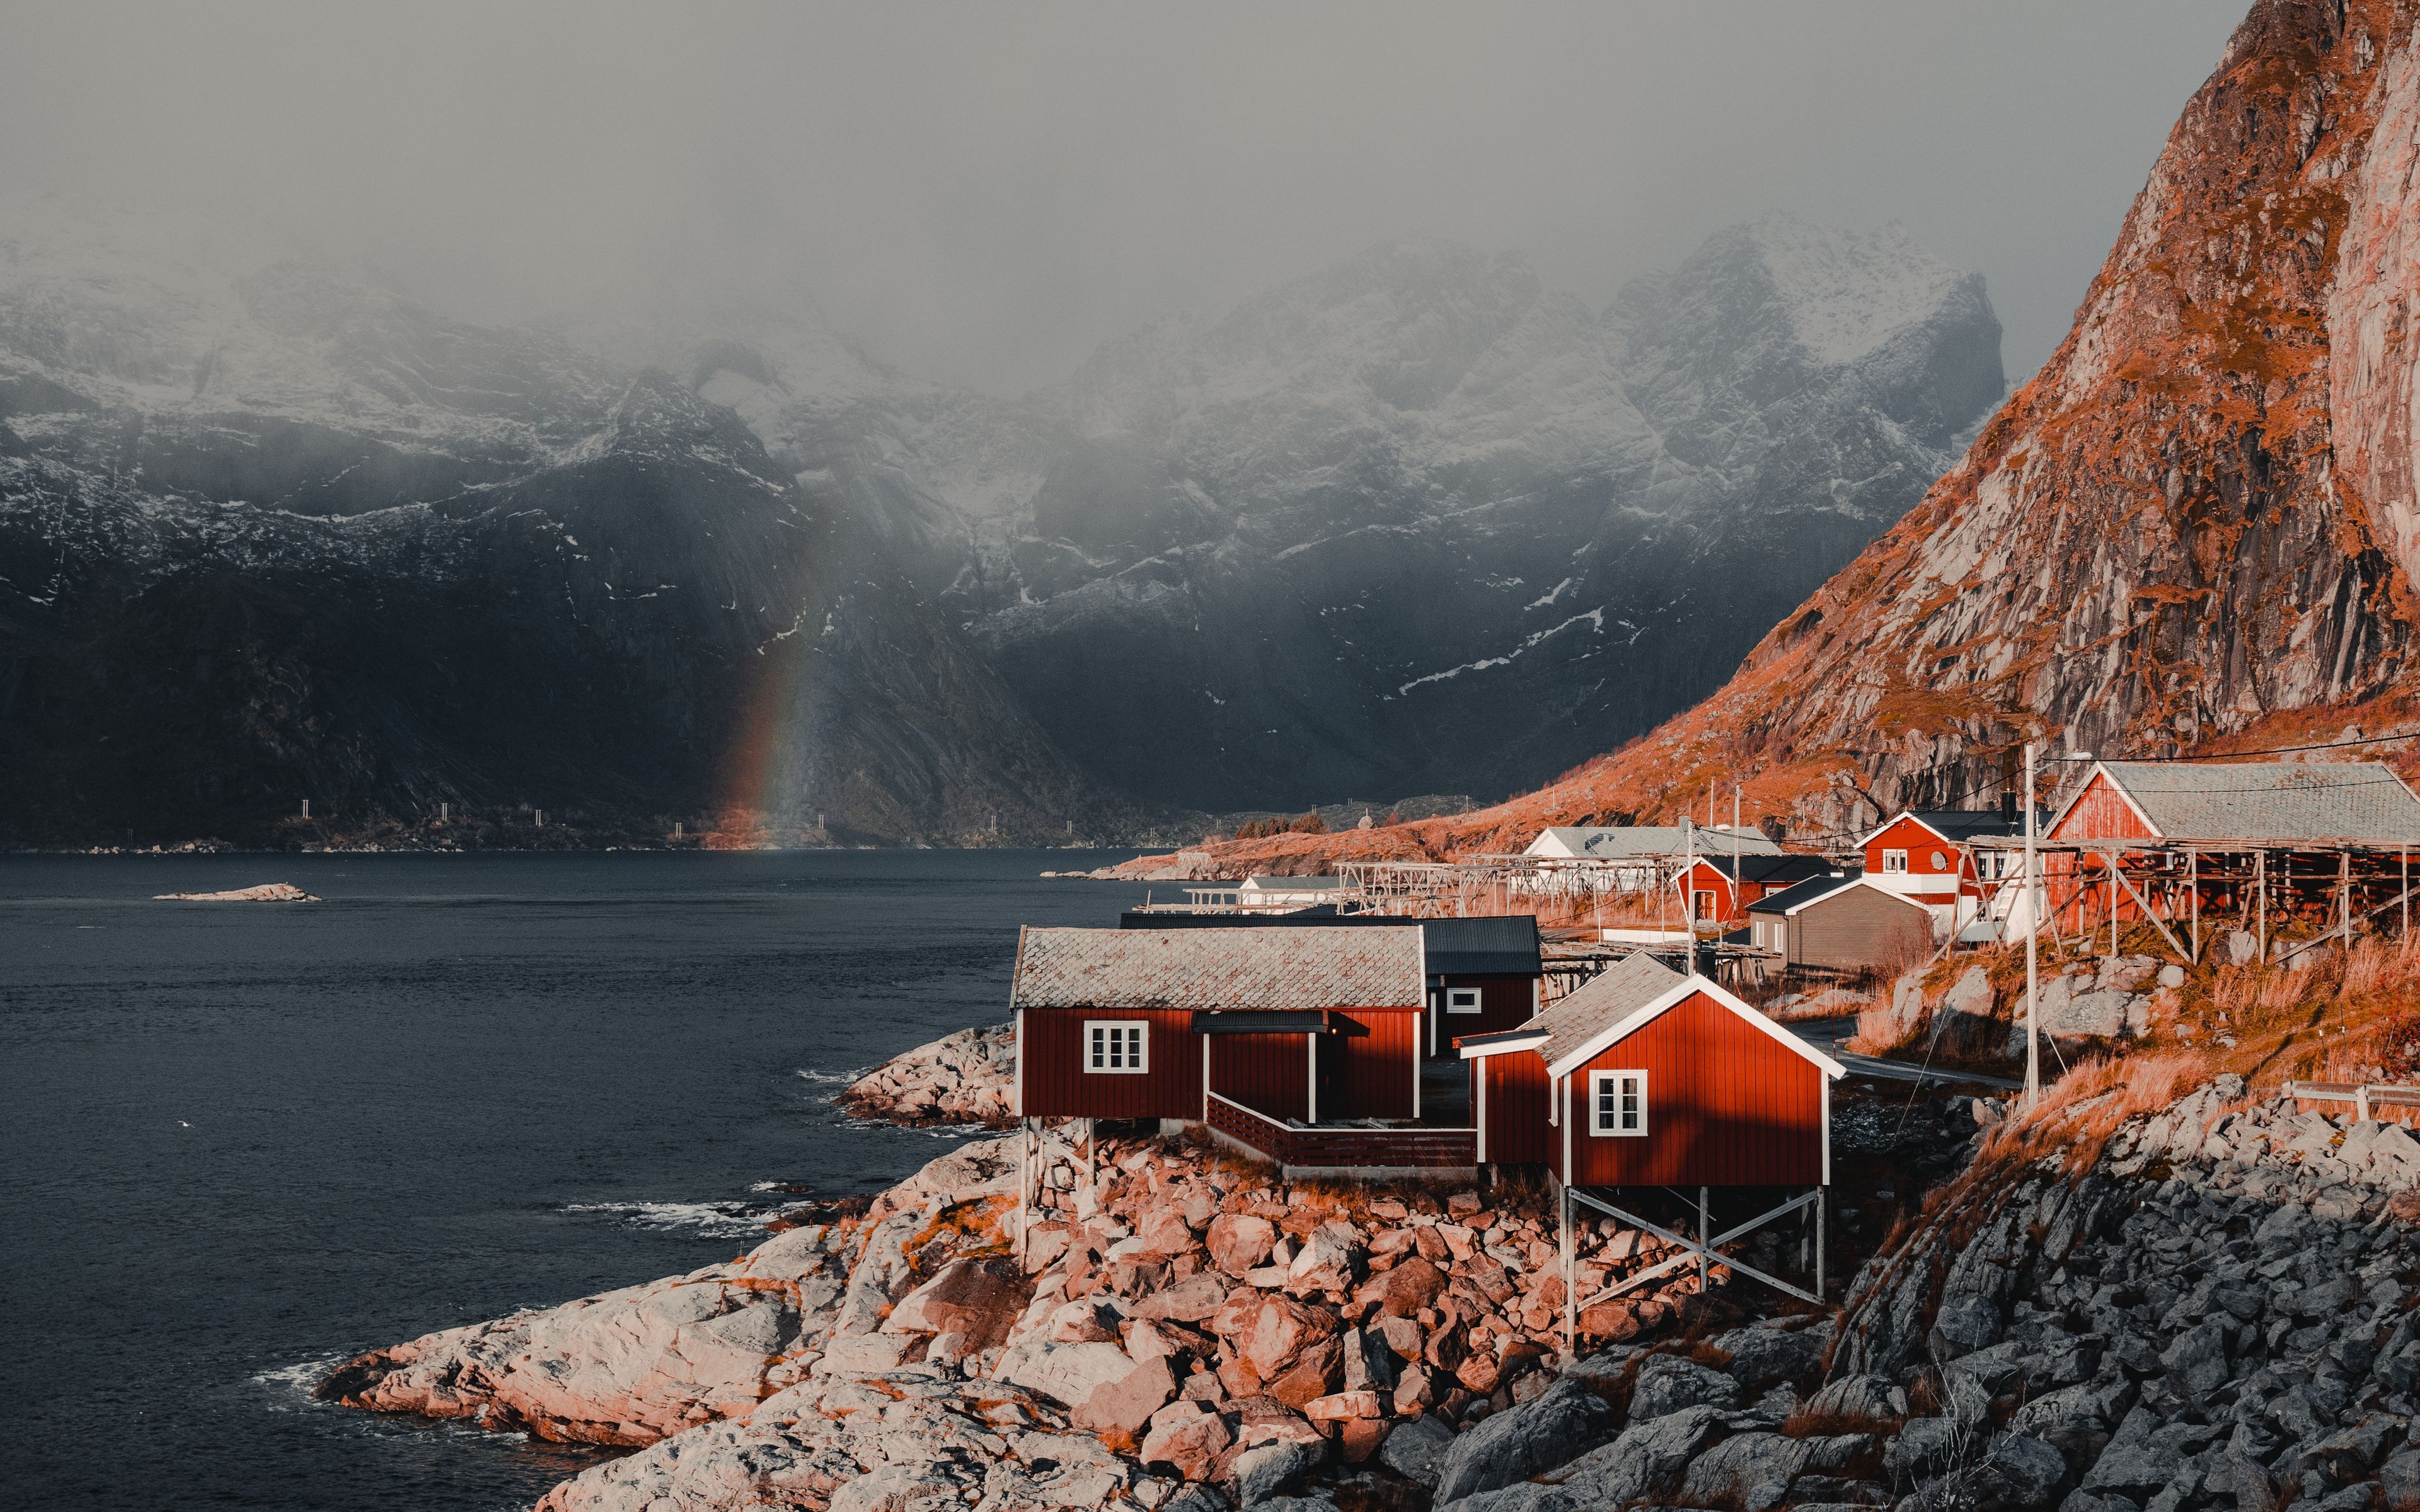 Download wallpaper 3840x2400 houses, mountains, fog, rainbow